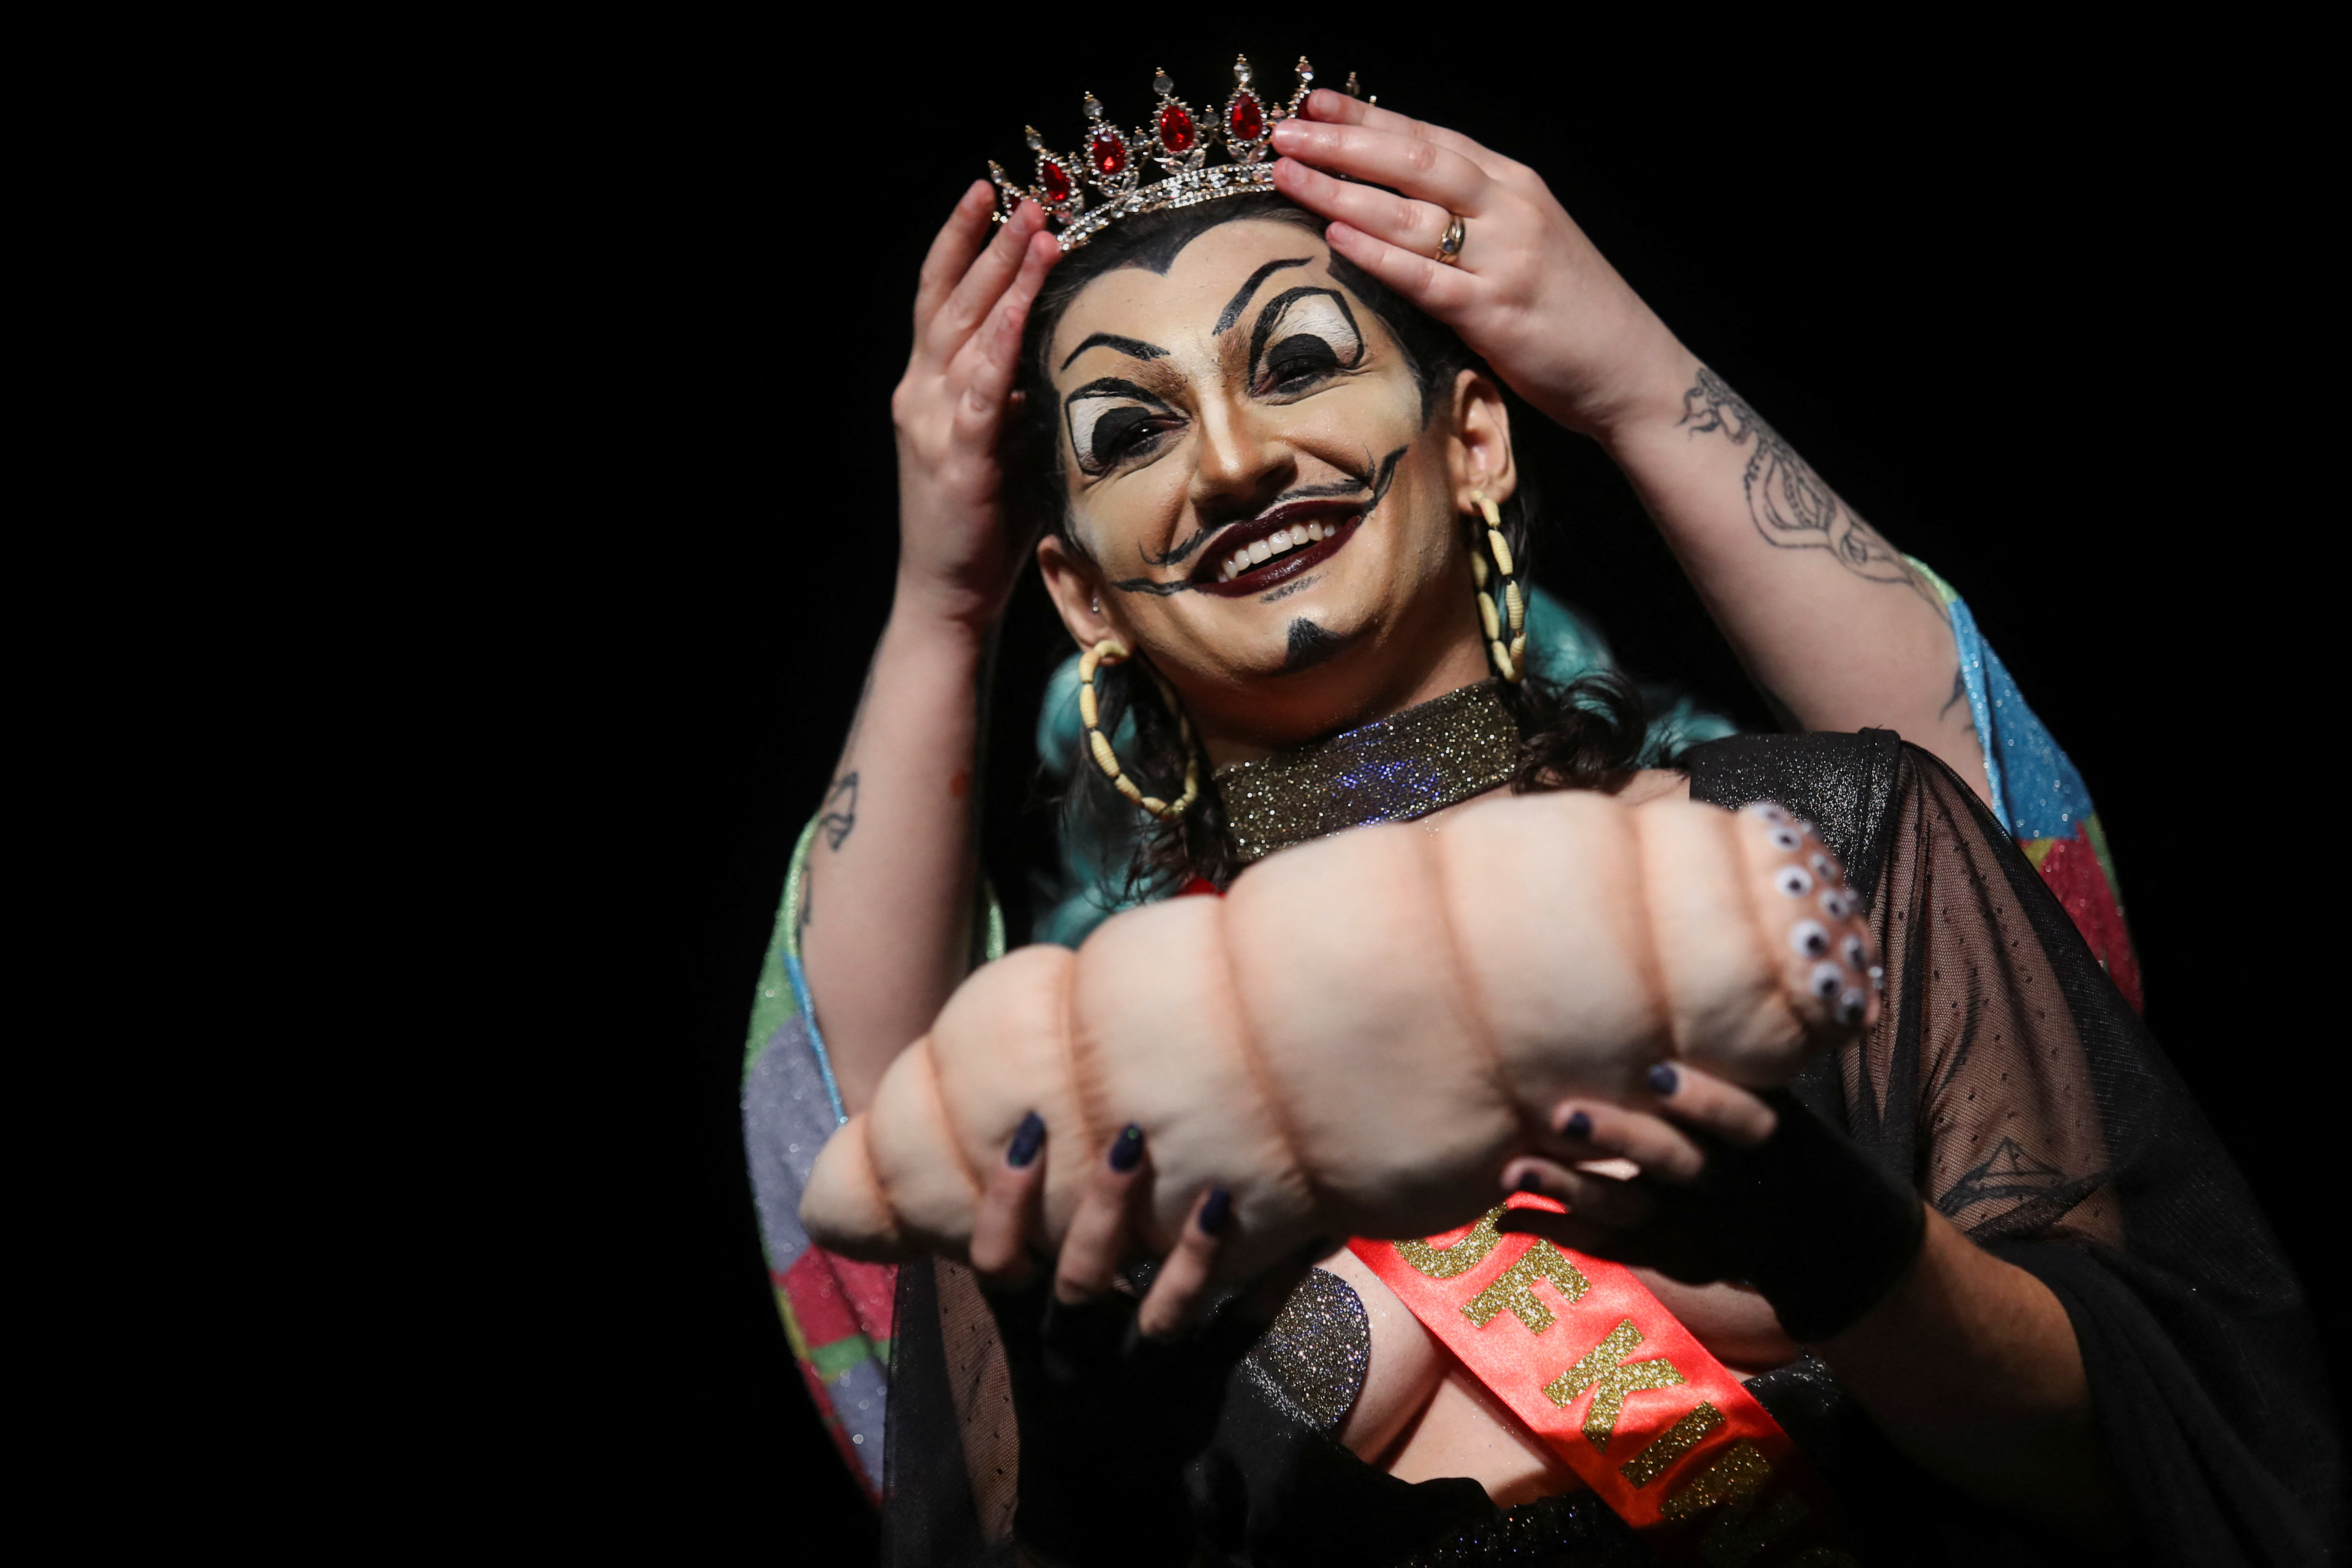 Drag kings participate in a contest in Sao Paulo